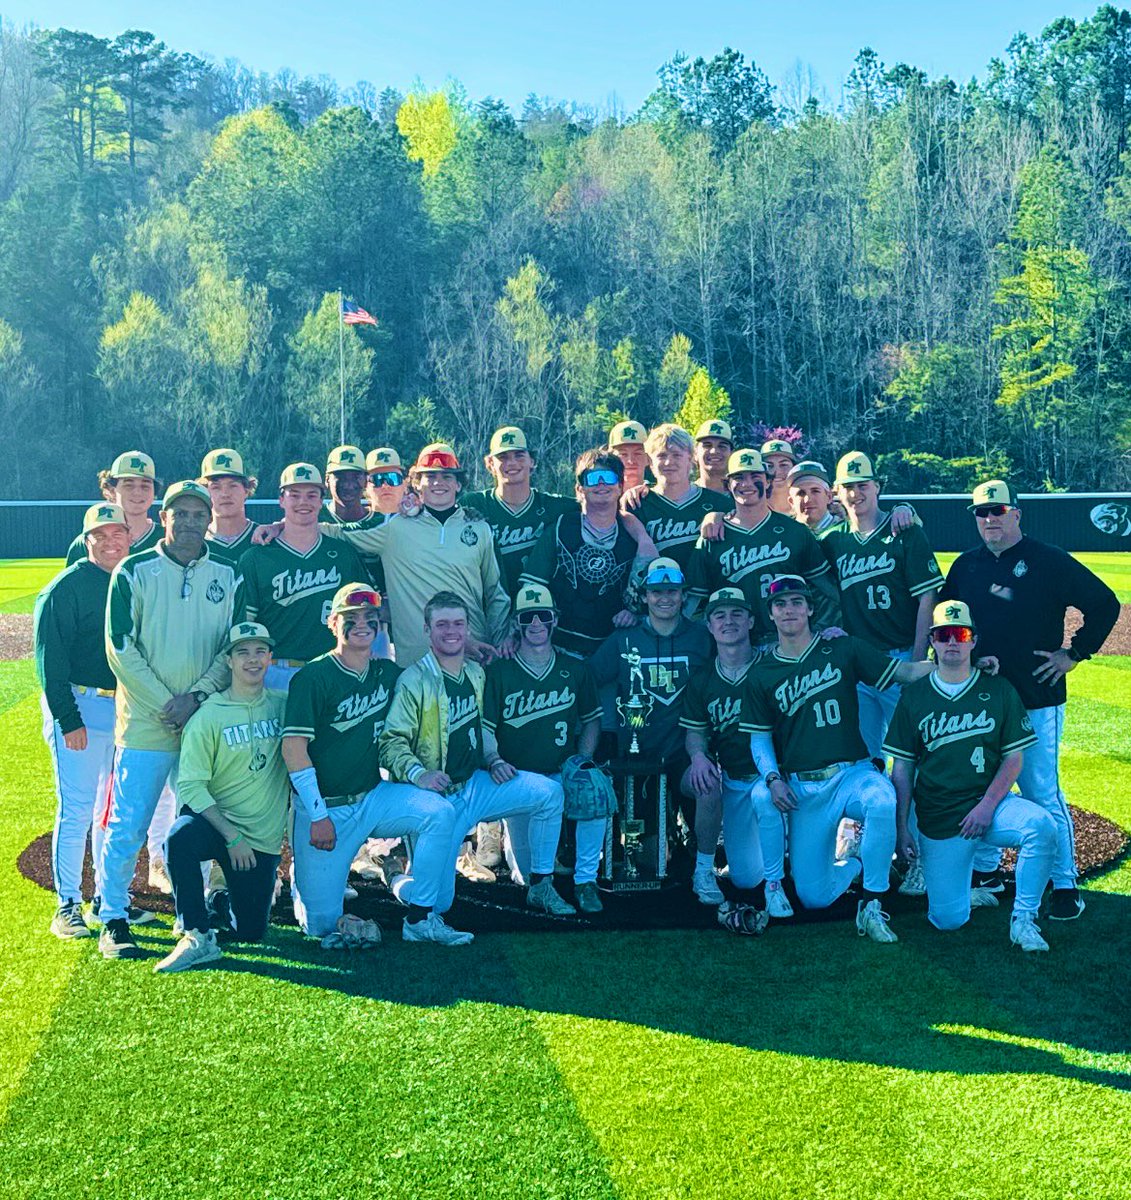 The Titans move to 15-5 on the season after taking Runner-Up in the first Annual 2024 Southeastern High School Baseball Classic which included 16 teams from Georgia, Mississippi, Alabama, South Carolina, and Tennessee.@TheCoachesBoxGA @PrepBaseballGA @PG_Georgia @MaxPreps